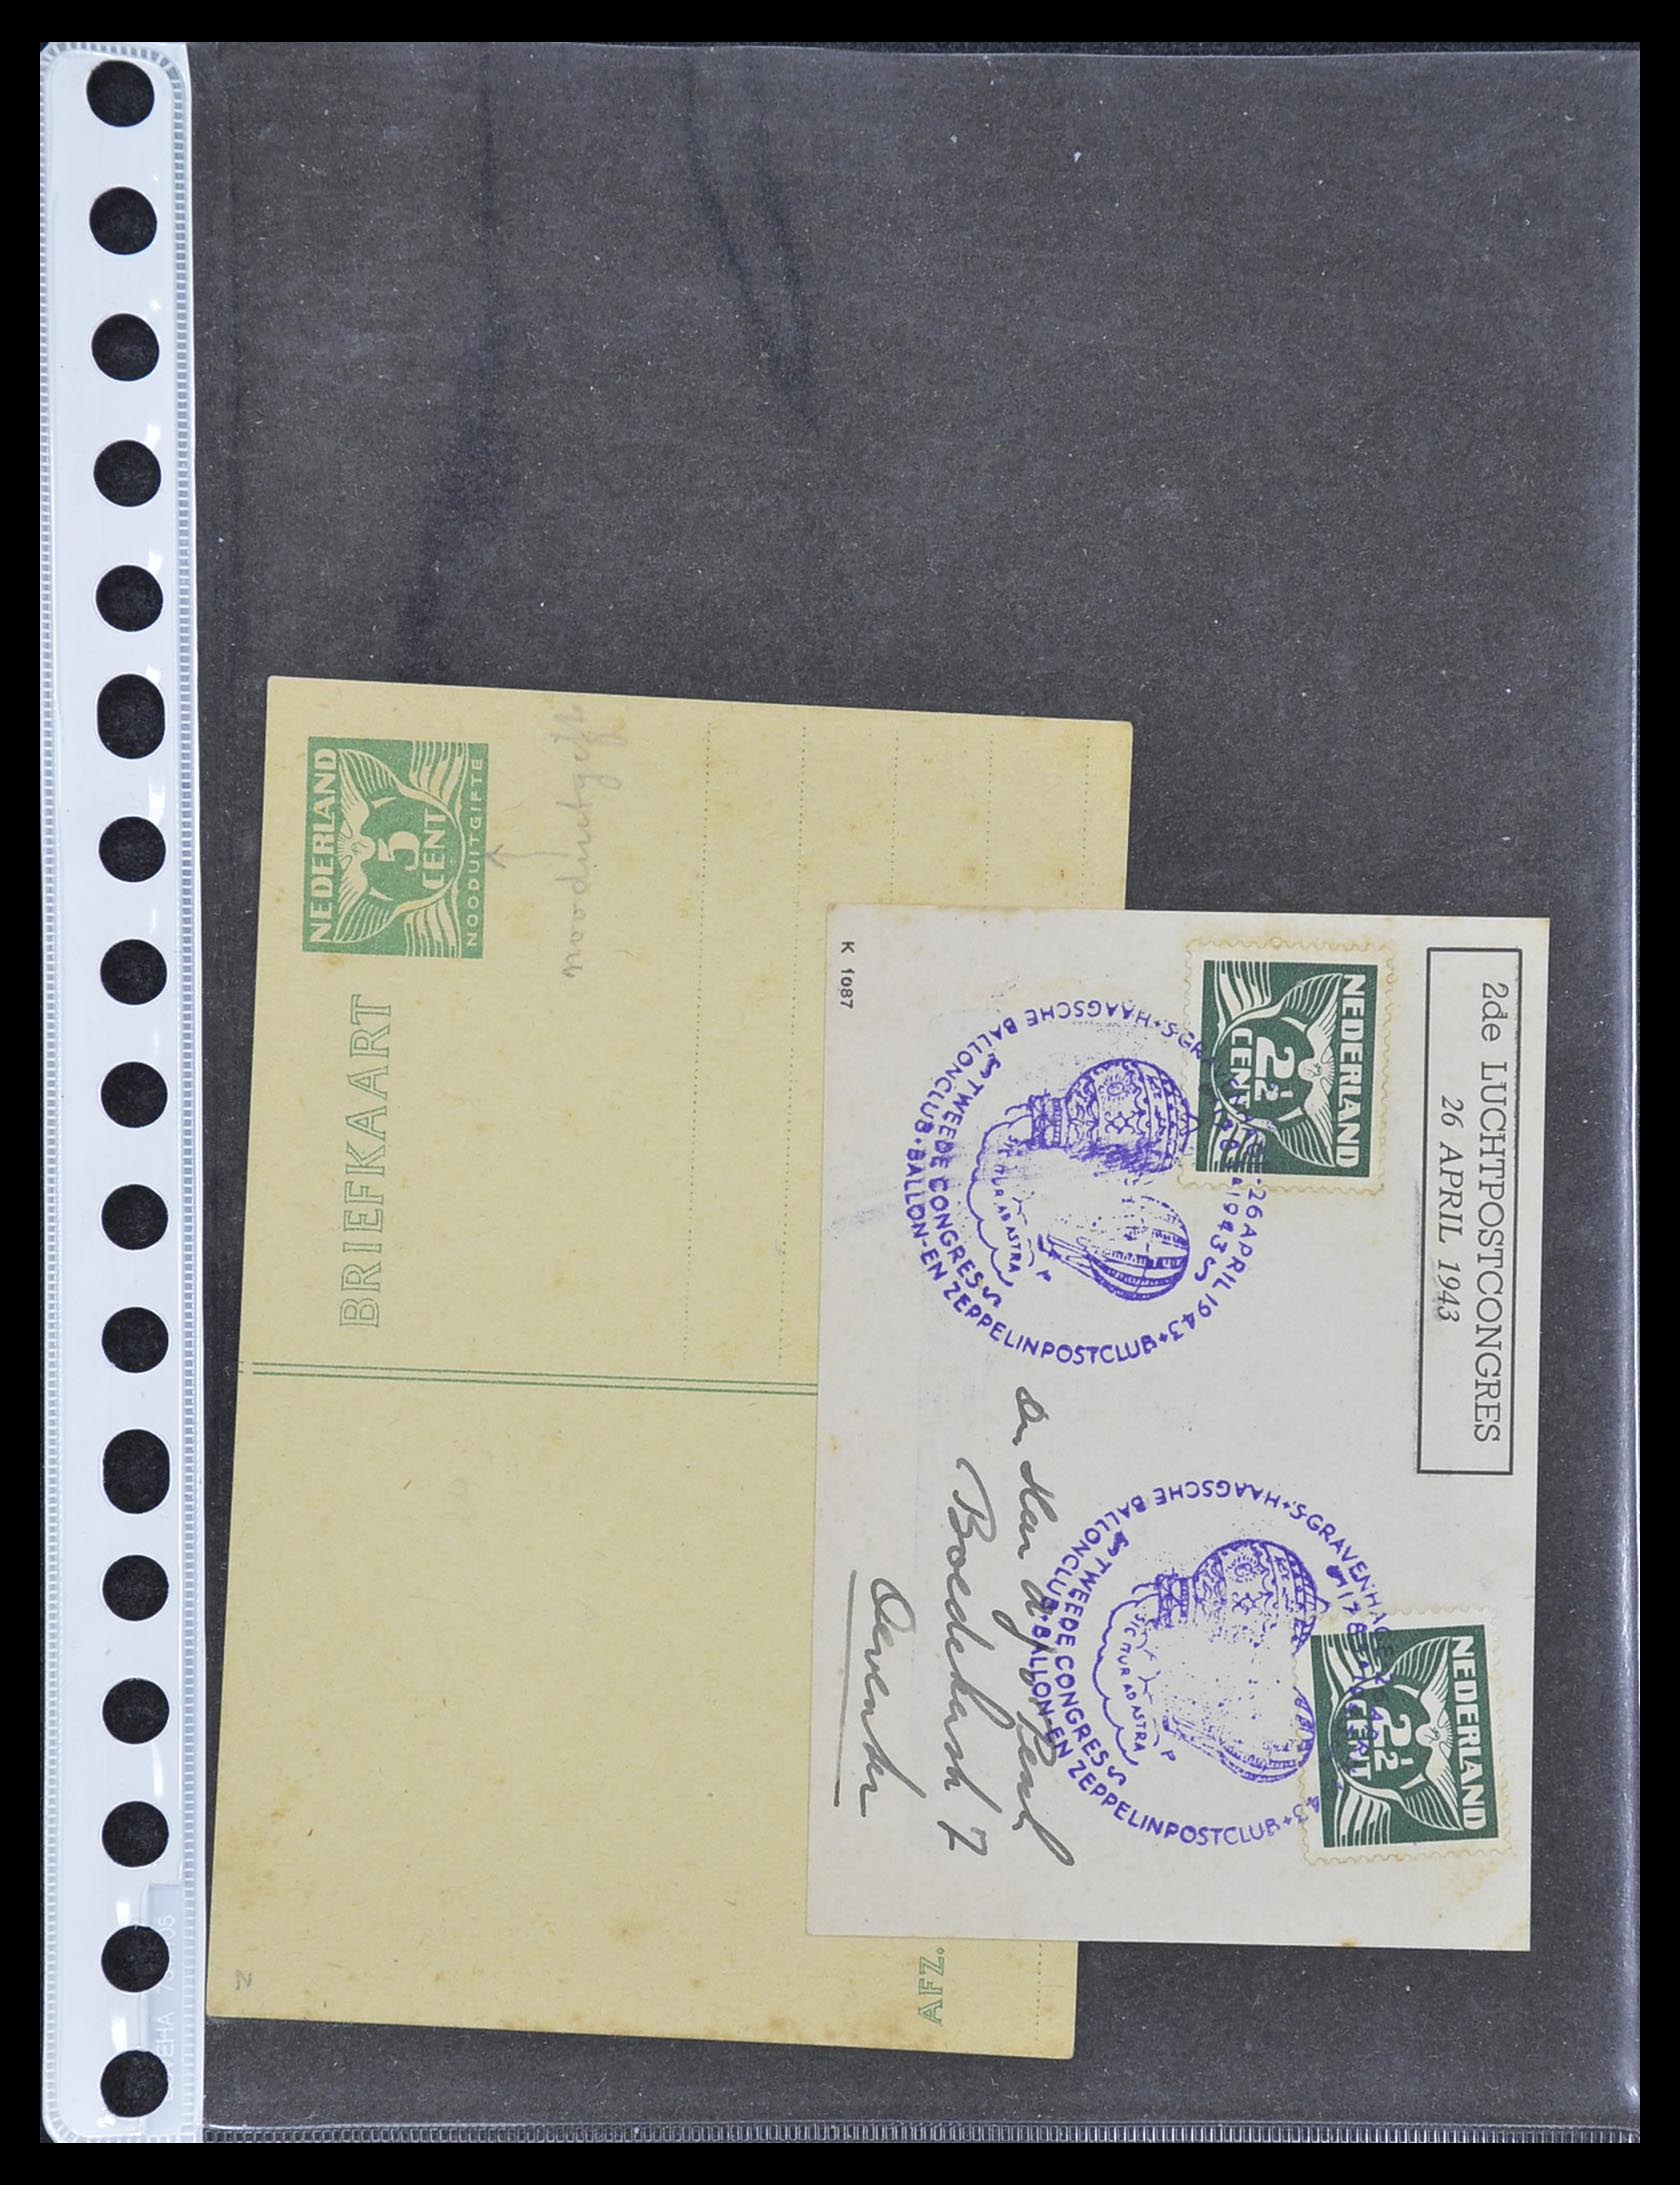 33344 146 - Stamp collection 33344 Netherlands covers and cards 1850-1950.